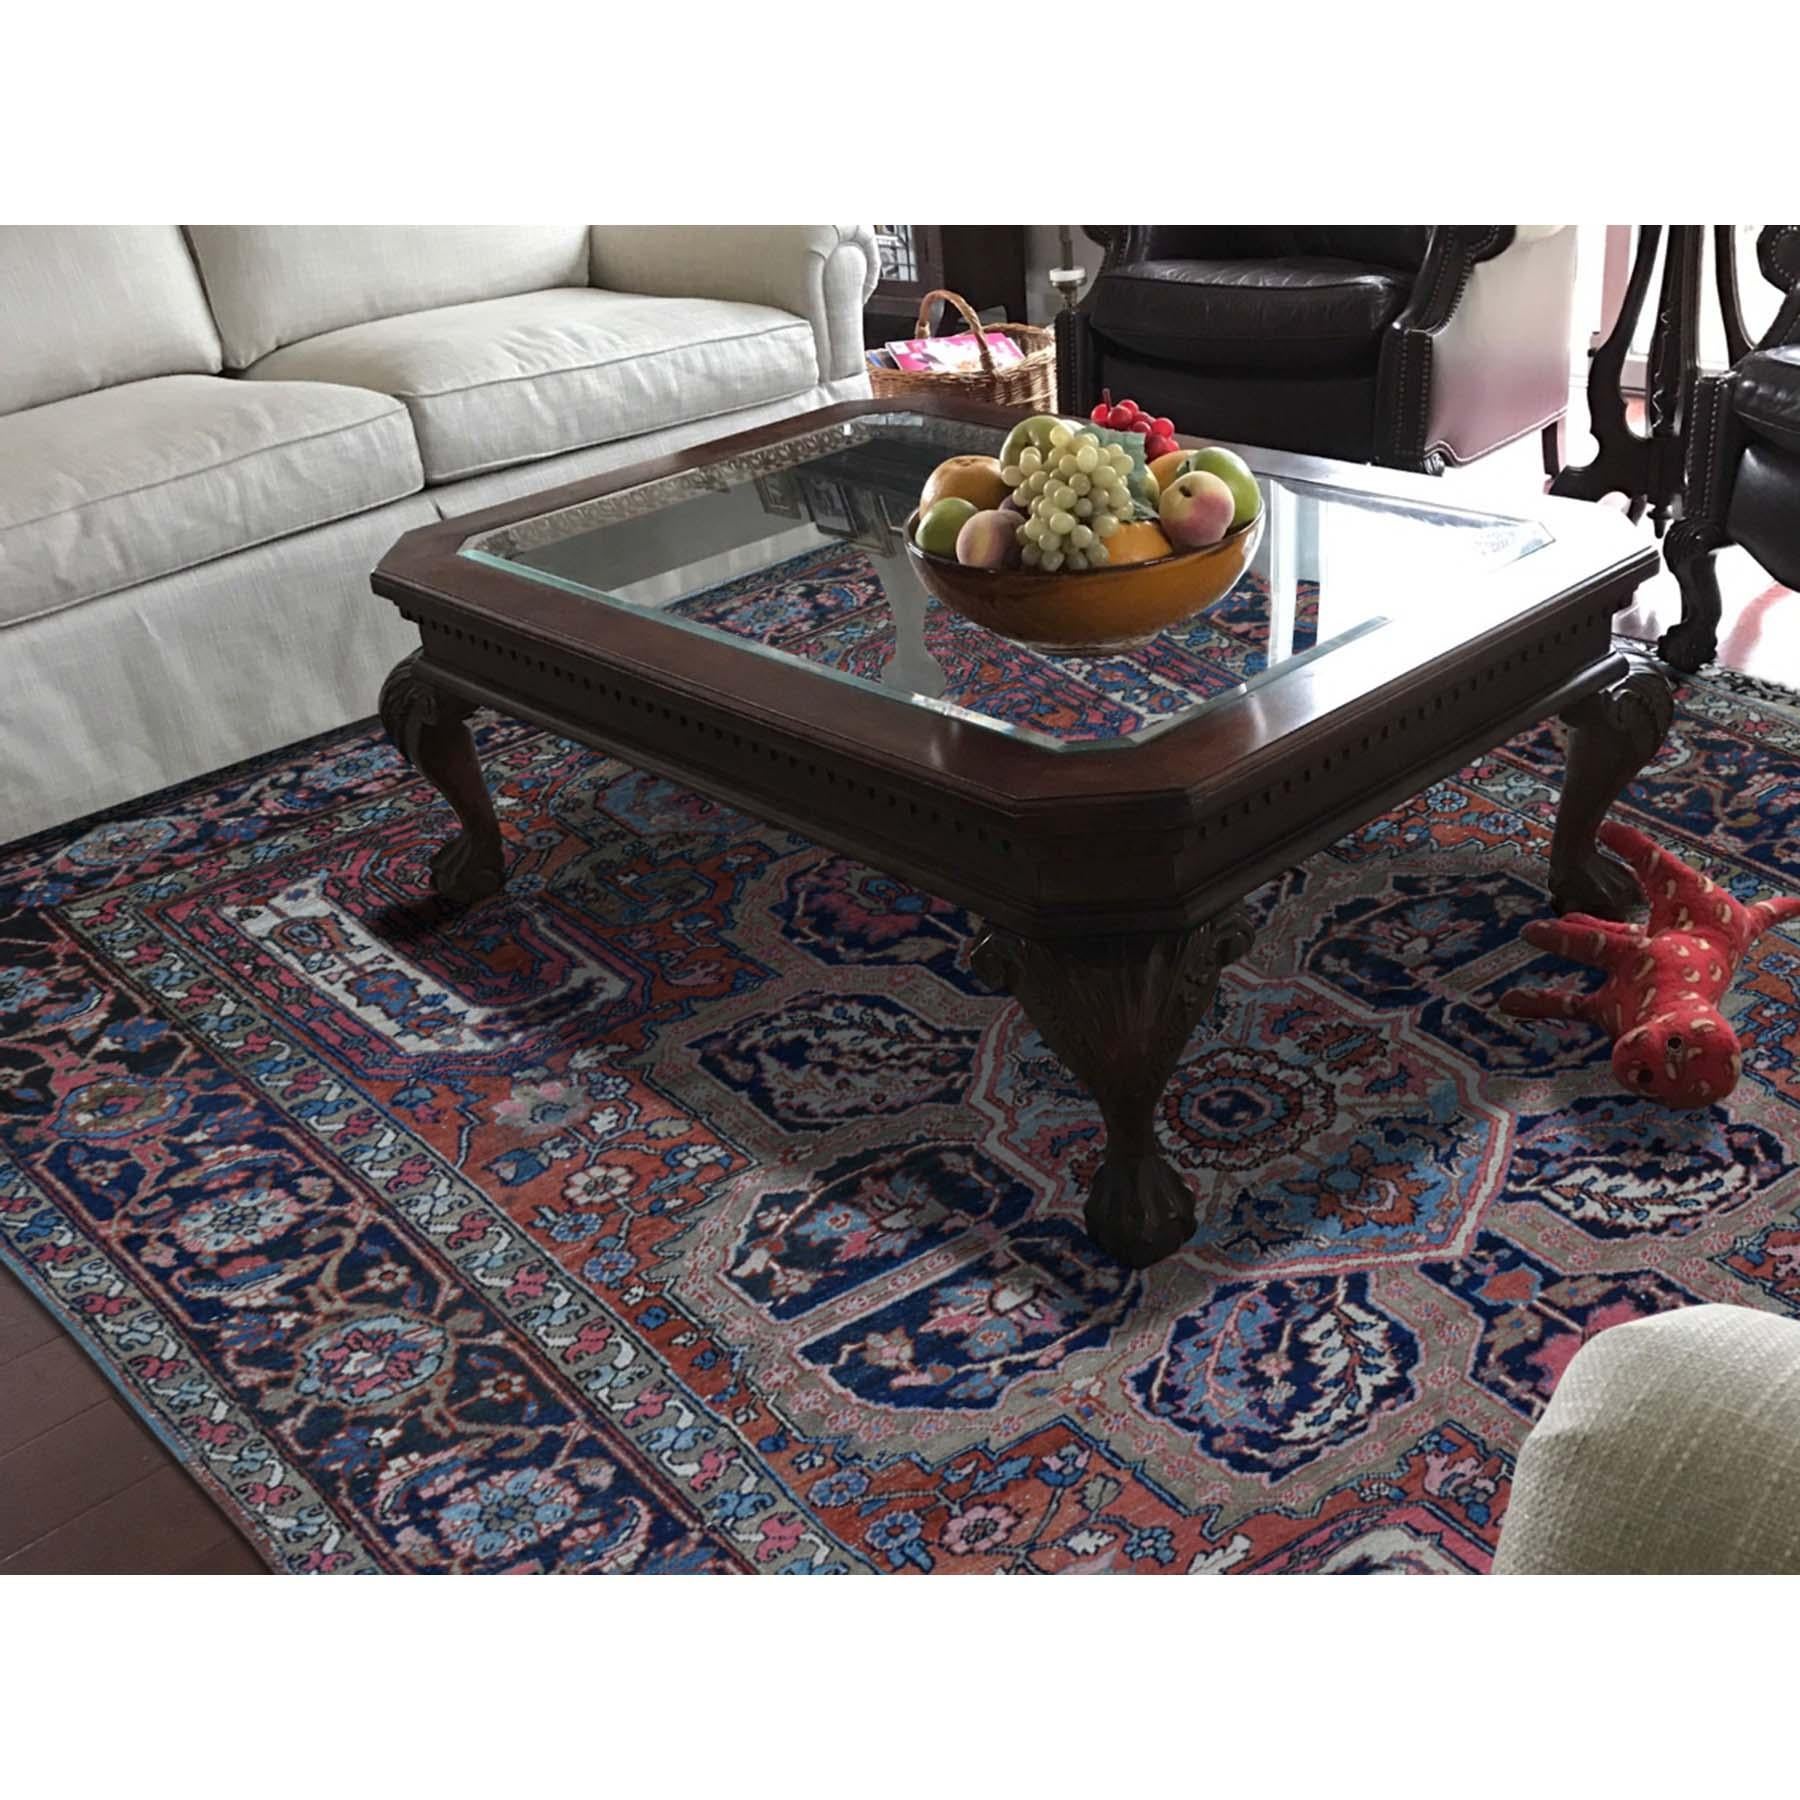 This is a truly genuine one-of-a-kind Antique Persian Heriz Good Condition Flower Design Hand-Knotted Rug.It has been Knotted for months and months in the centuries-old Persian weaving craftsmanship techniques by expert artisans. 


Primary